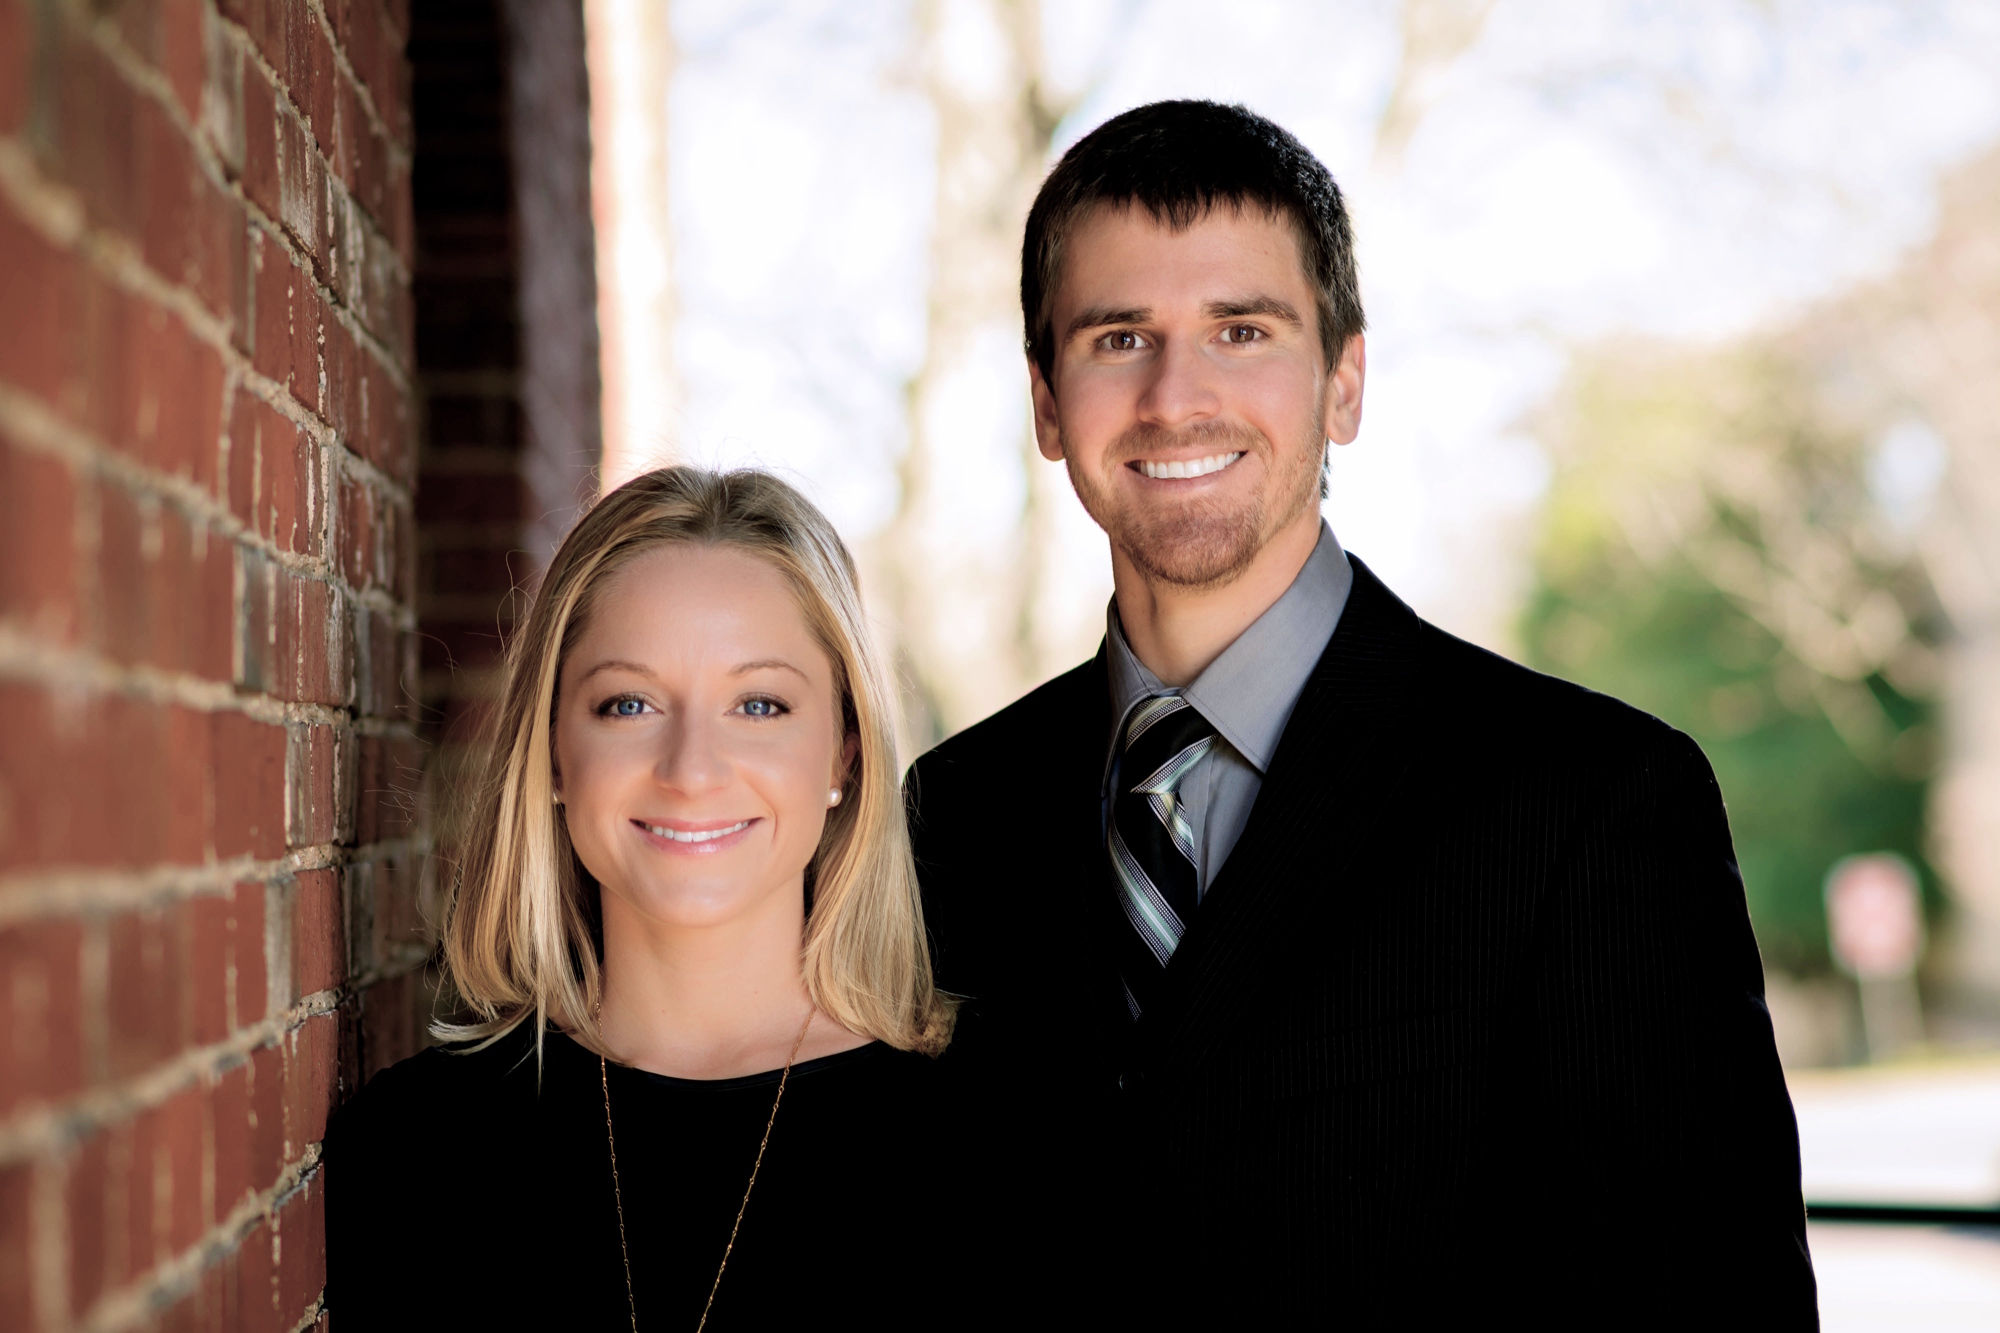 Drs. Laura and Logan Swaim are eager to open a chiropractic practice in Lakewood Ranch.